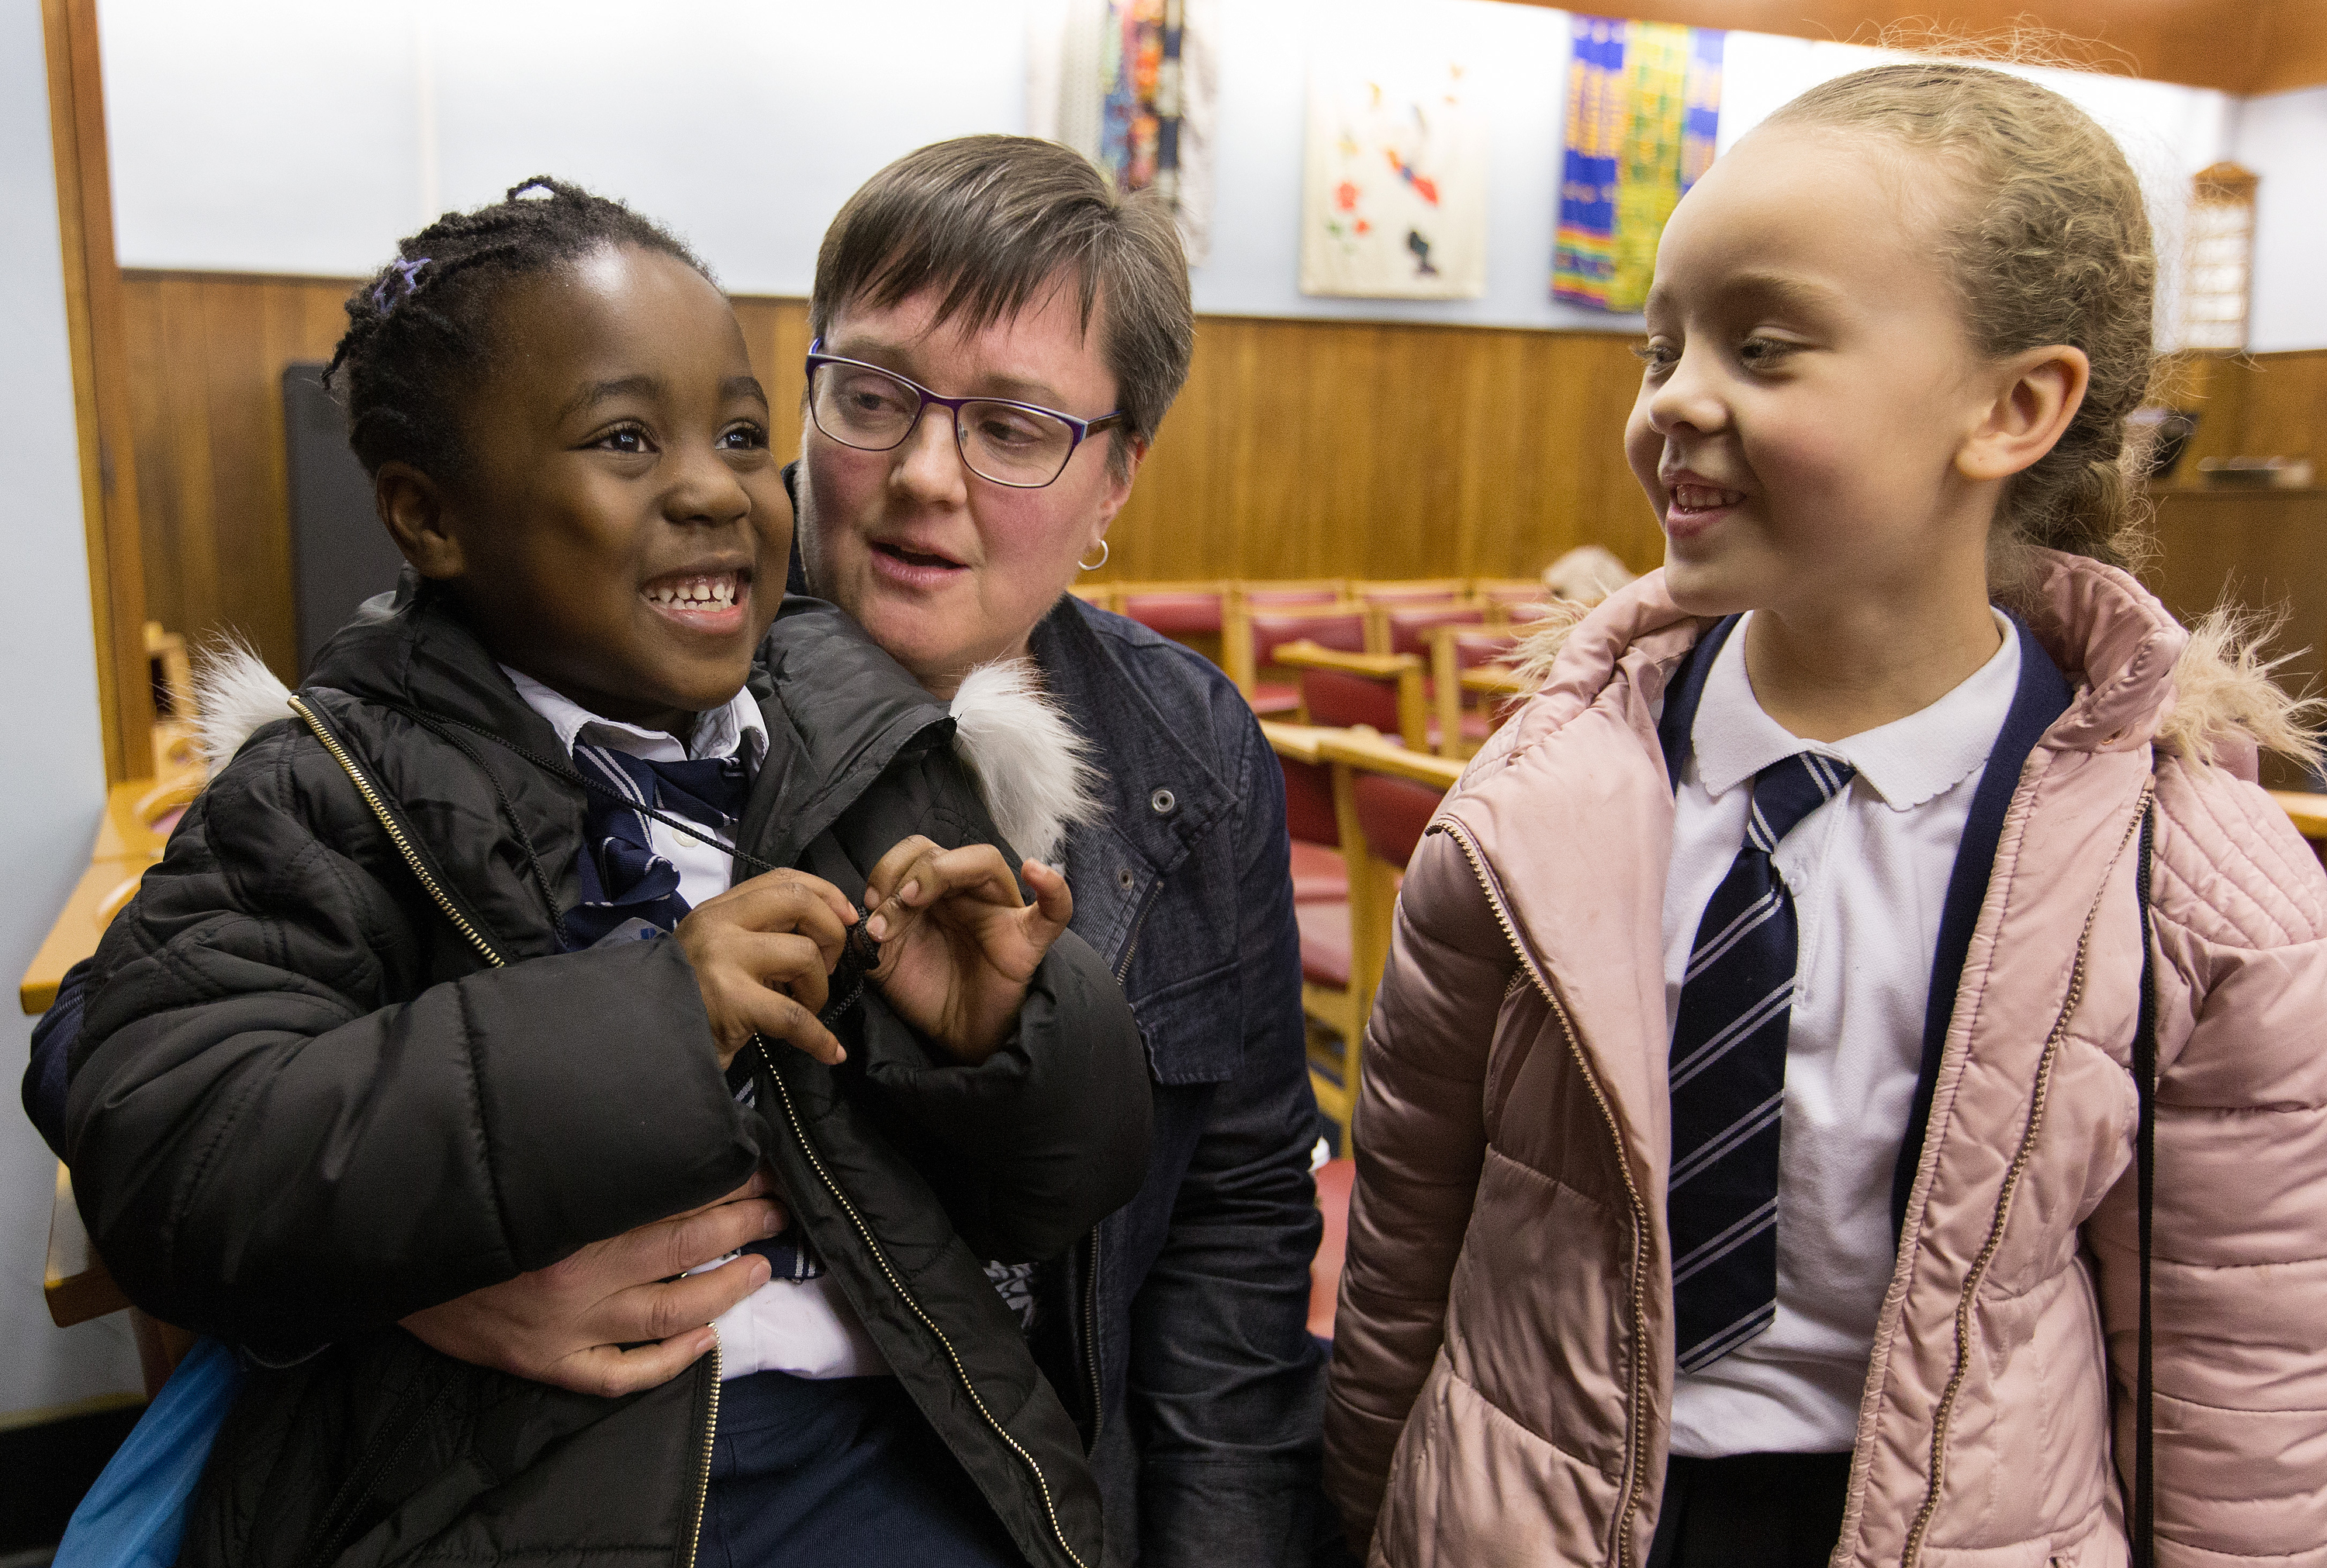 Nwarebea Baffoe (left) and Rebecca Henry, both age 6, stop by after school to visit with the Rev. Janet Corlett at Bermondsey Central Hall Methodist Church in London. Photo by Mike DuBose, UMNS.